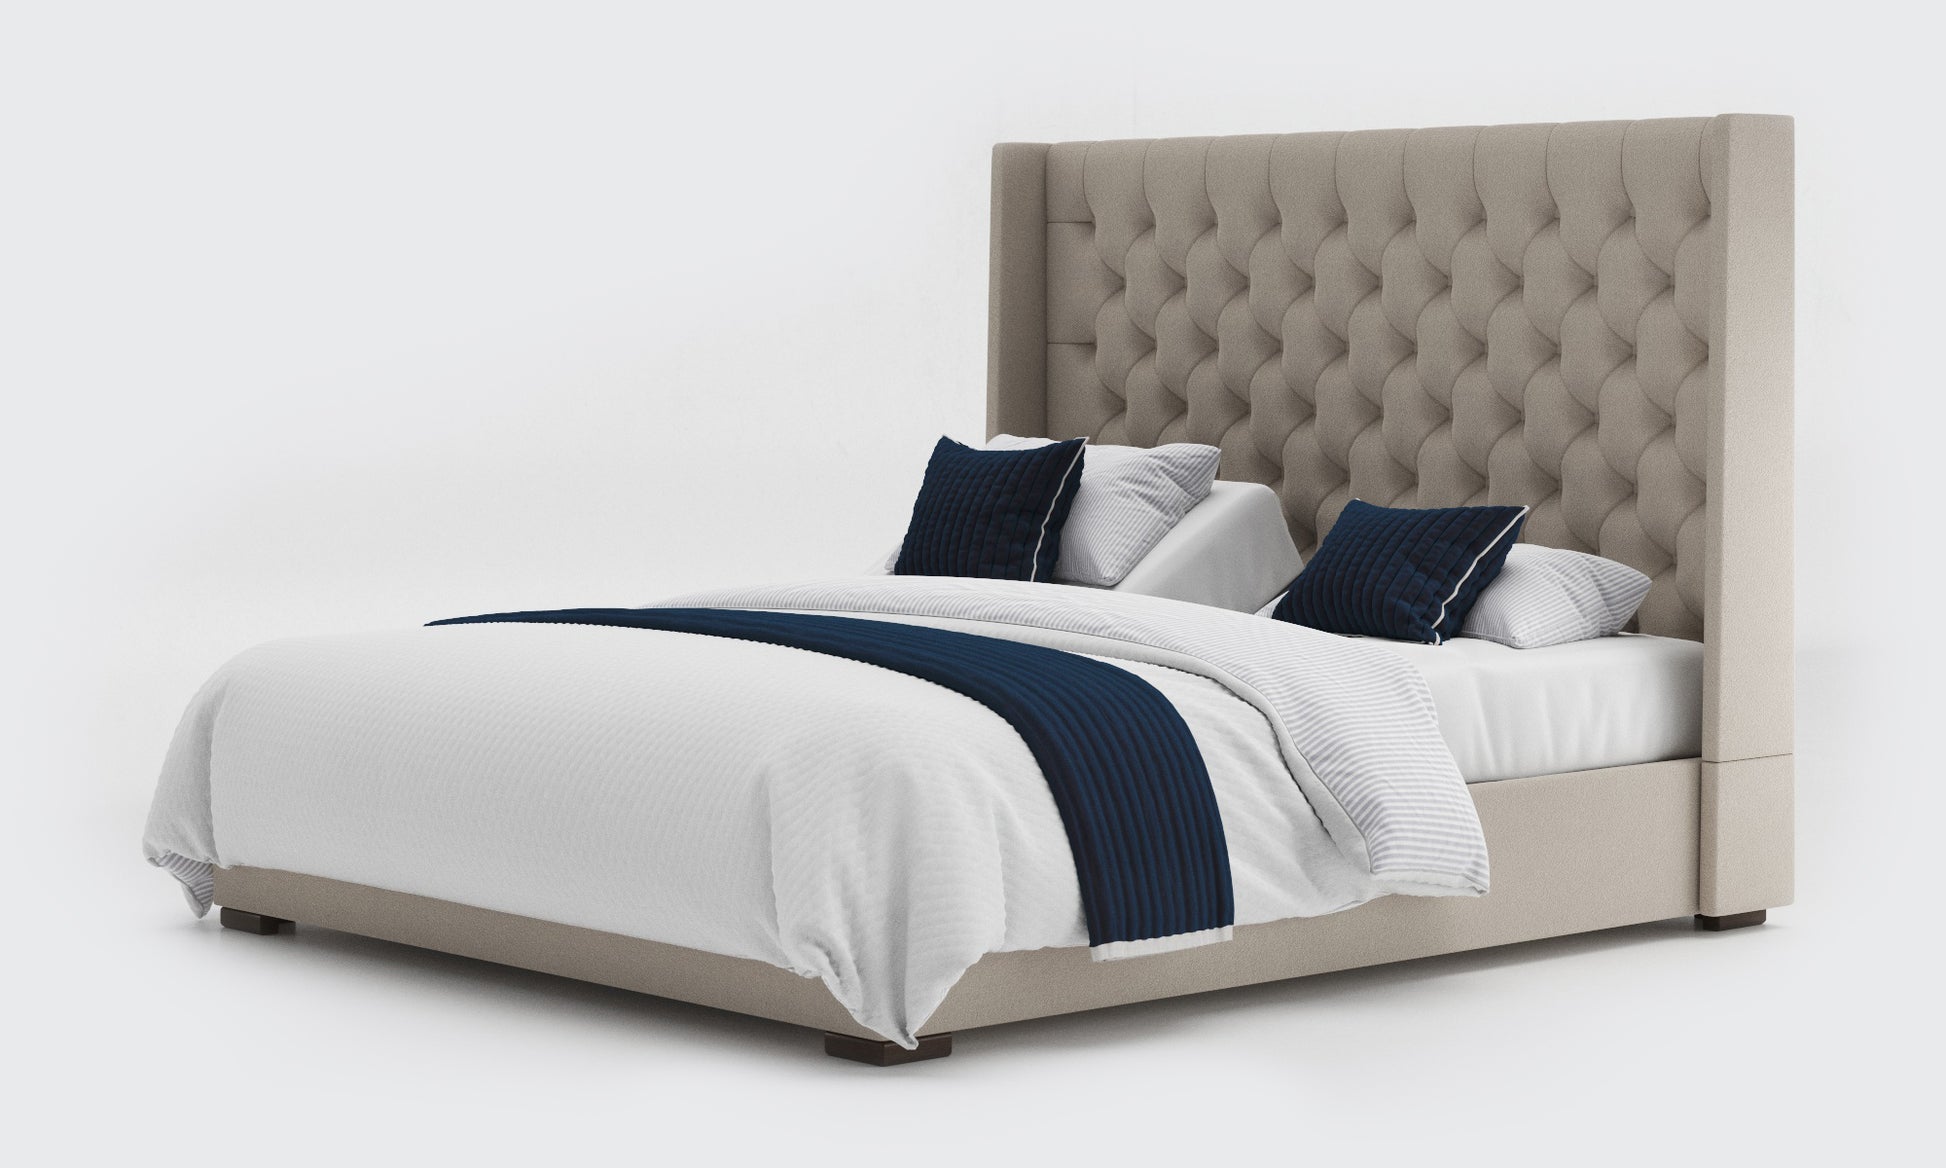 kensington 6ft super king dual bed and mattress in the linen material